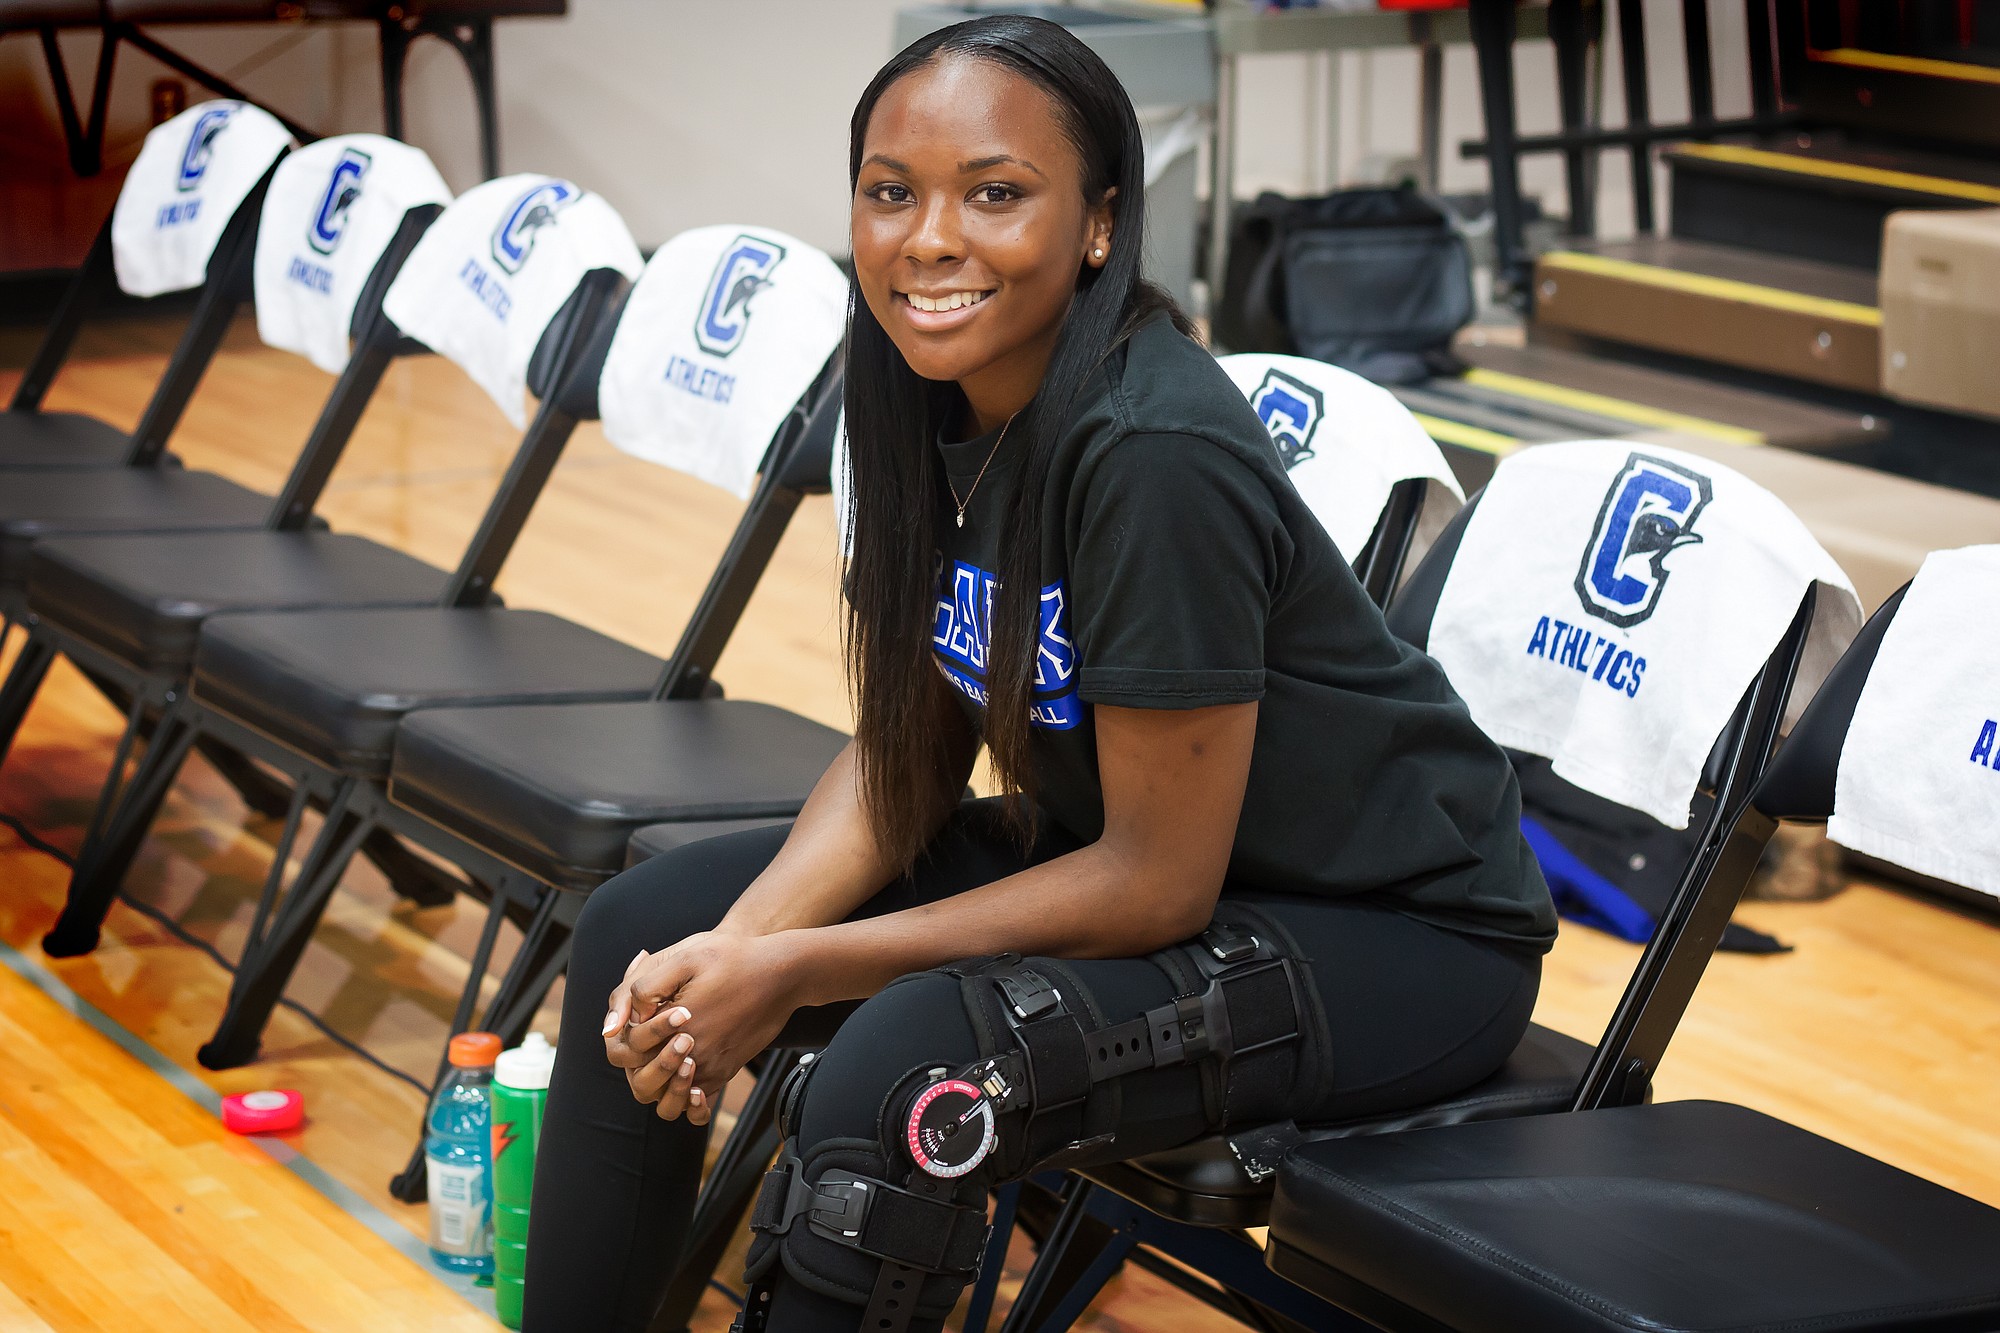 Clark captain Shantell Jackson has to endure the rest of the season in a knee brace from the bench after suffering a torn ACL and meniscus in the third game of the season.